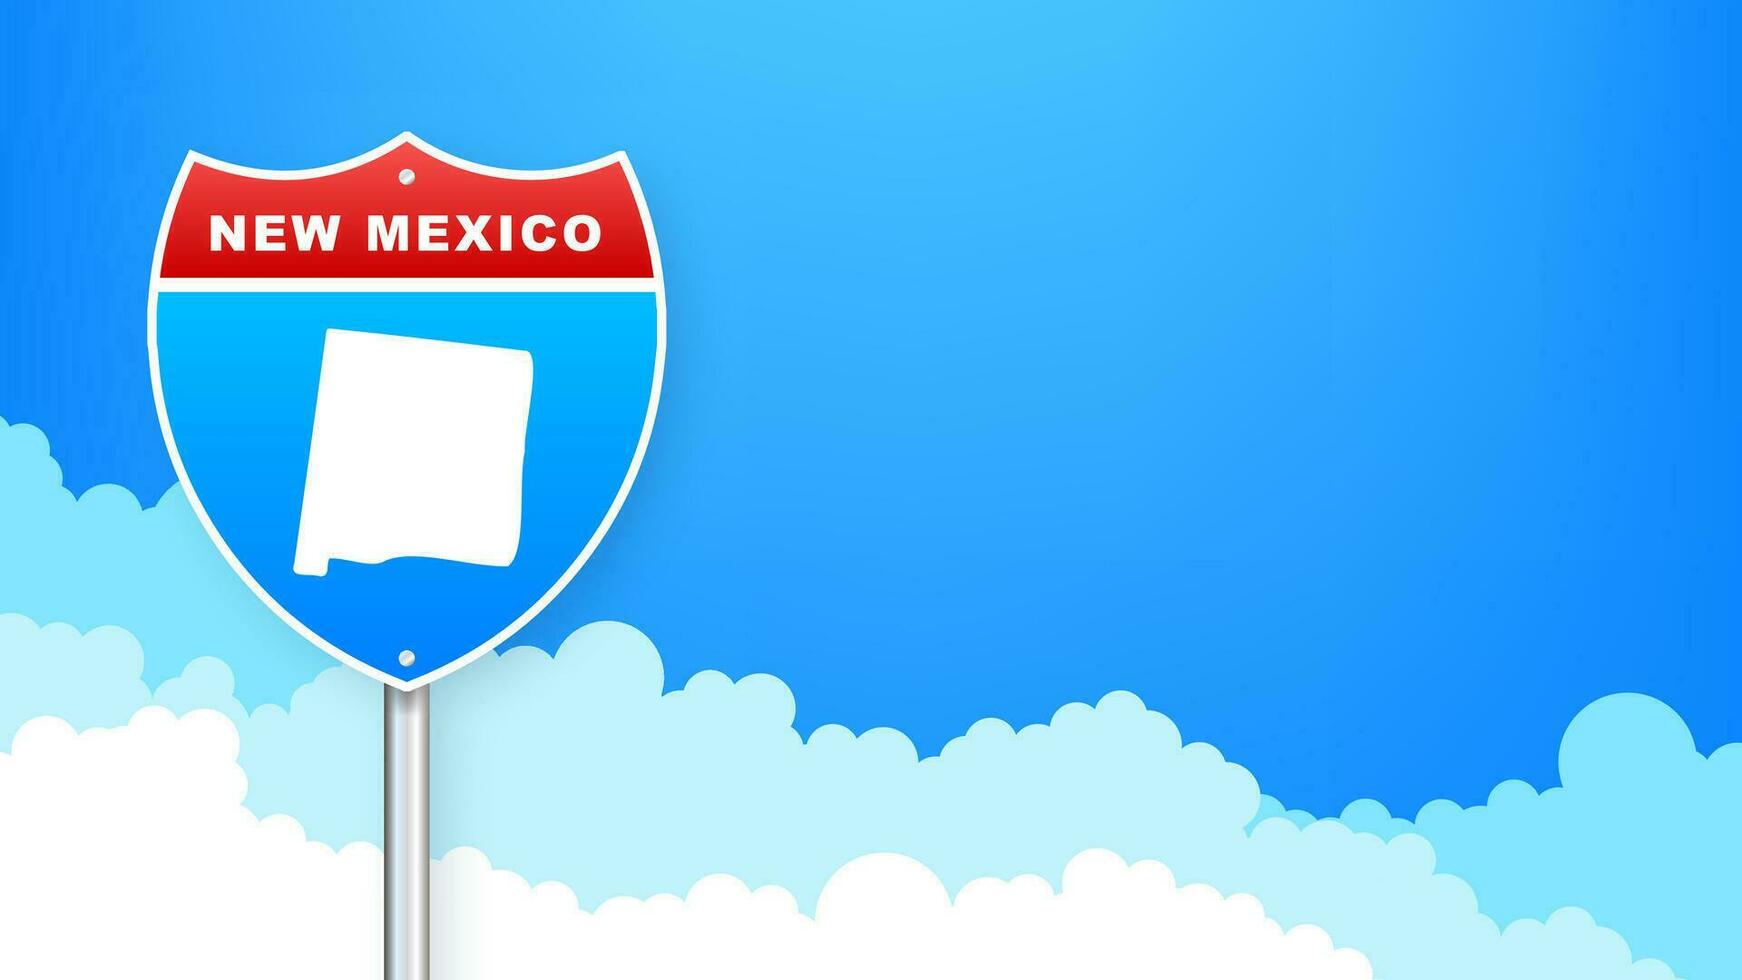 New Mexico map on road sign. Welcome to State of New Mexico. Vector illustration